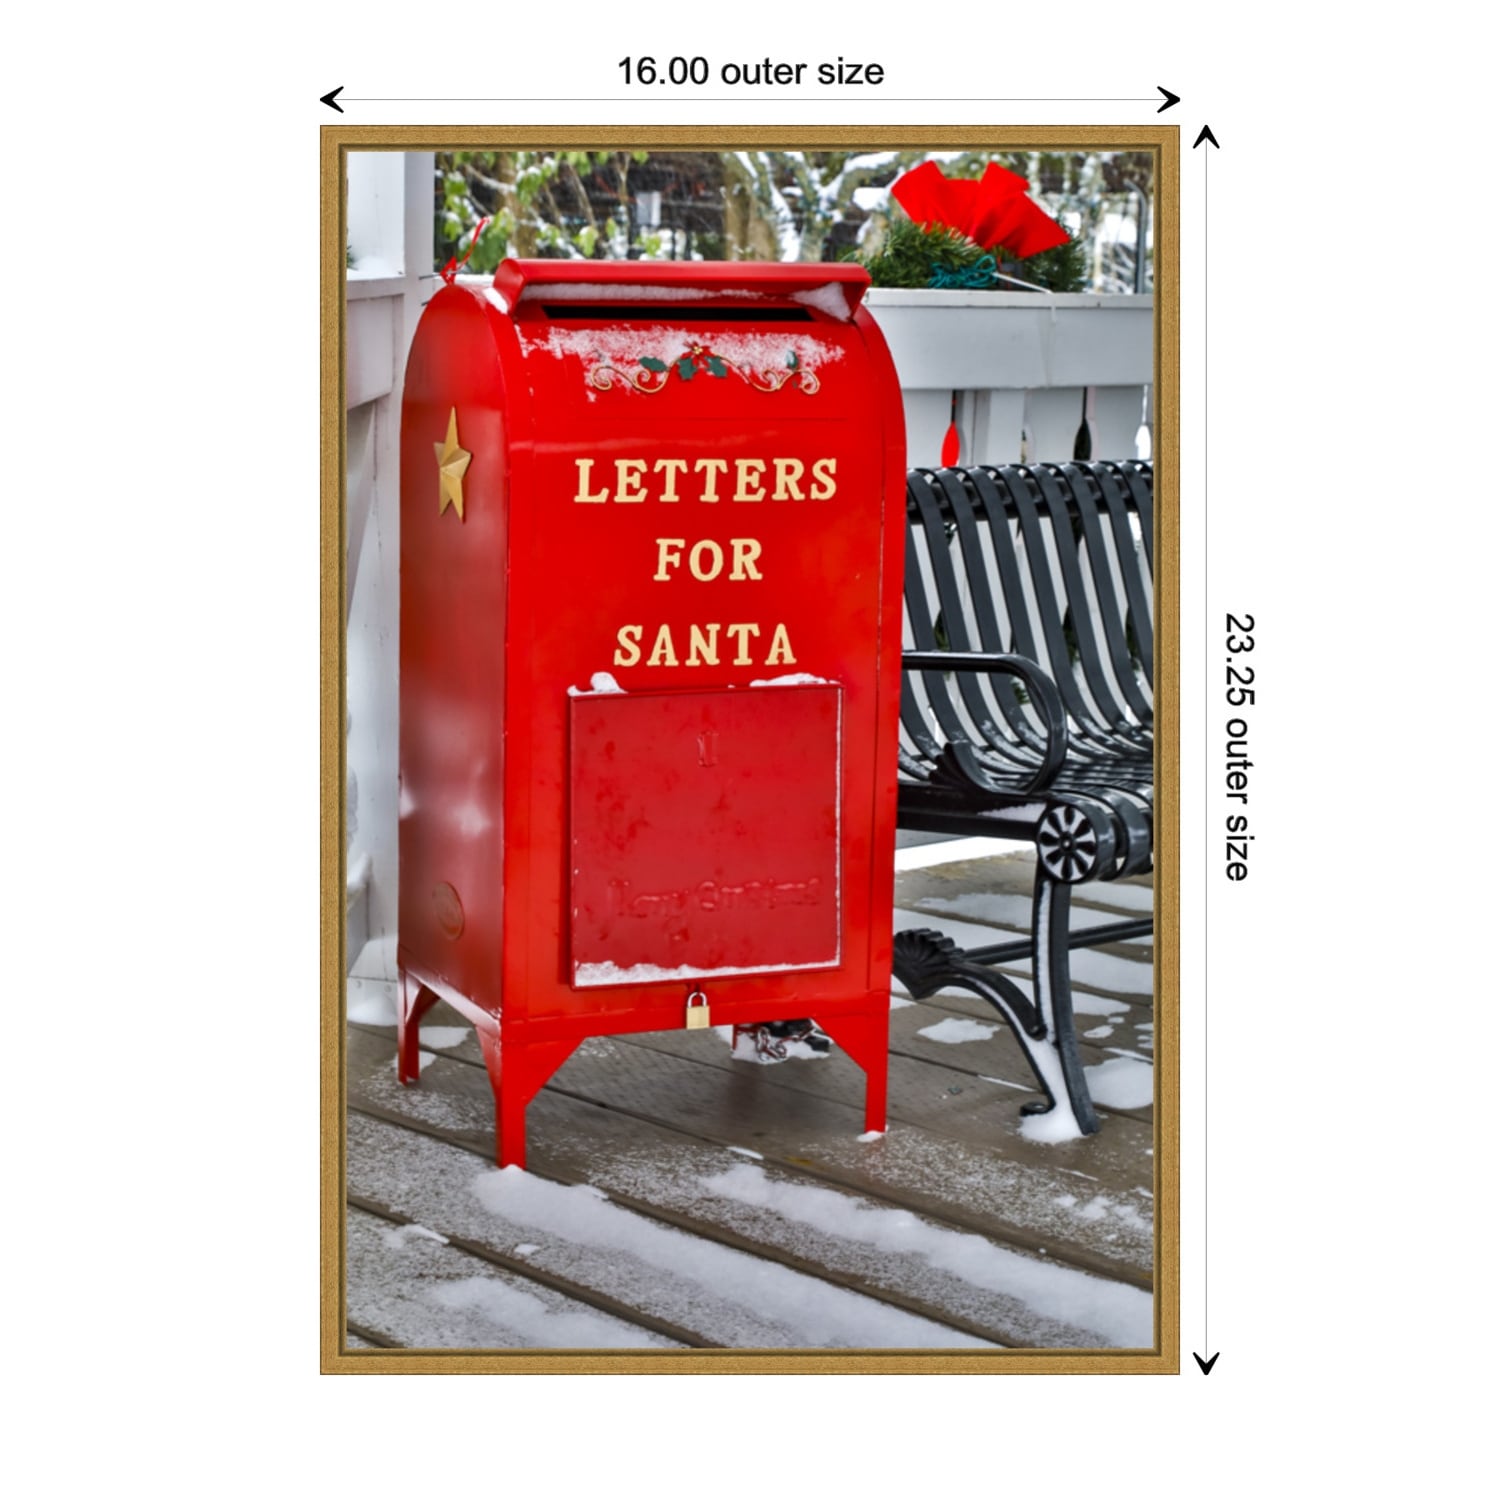 Letters for Santa Red Mailbox with Snow, D Gulin Framed Canvas Print